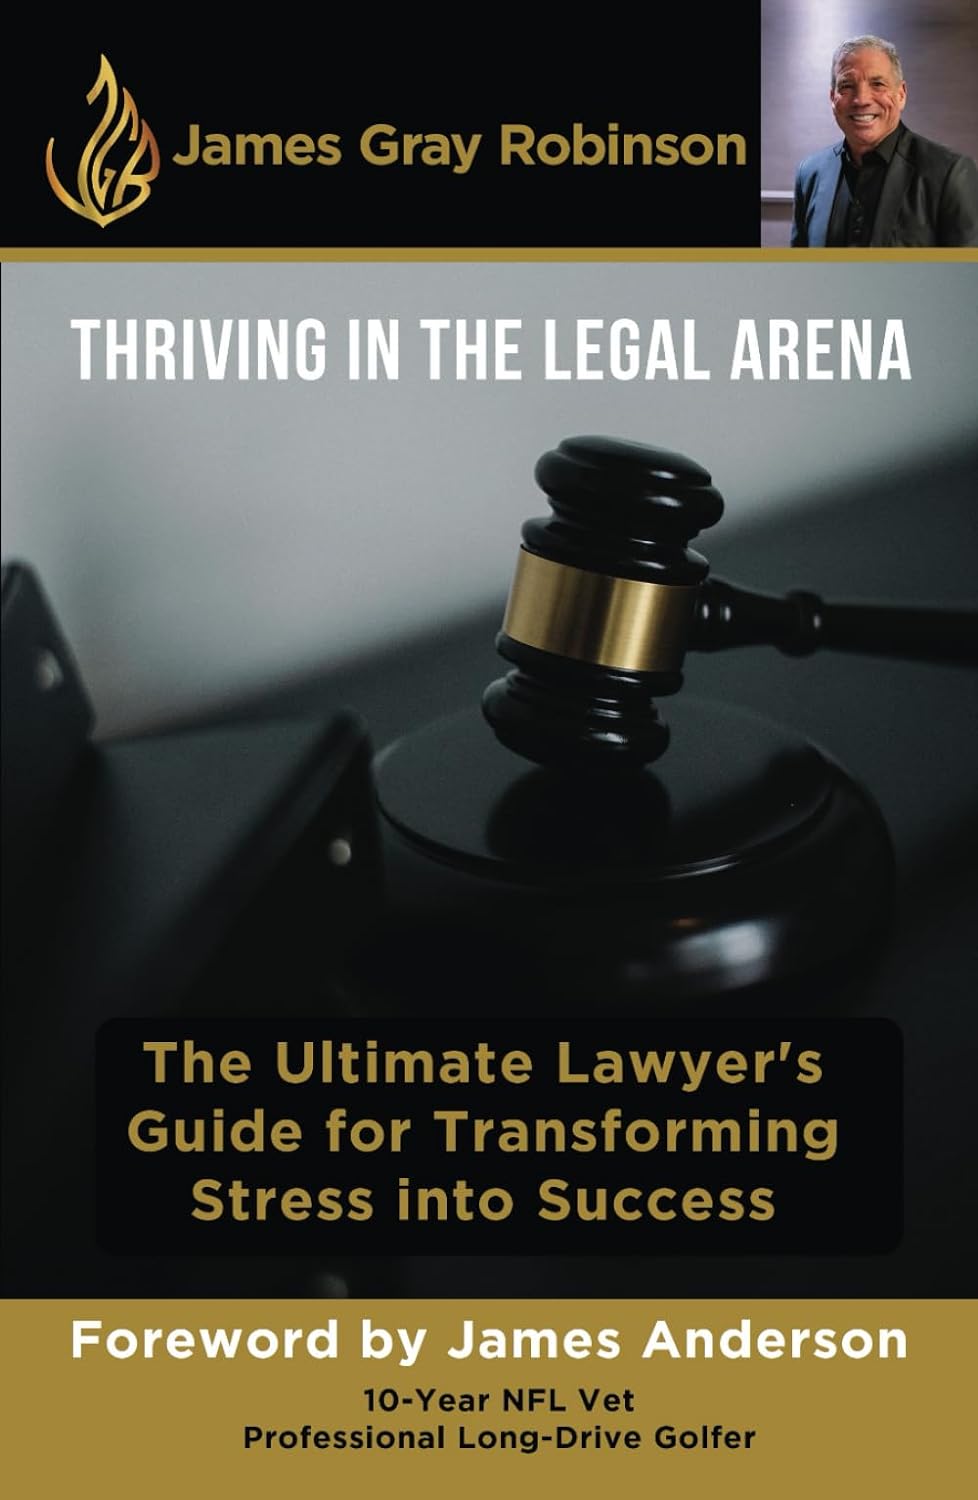 THRIVING IN THE LEGAL ARENA